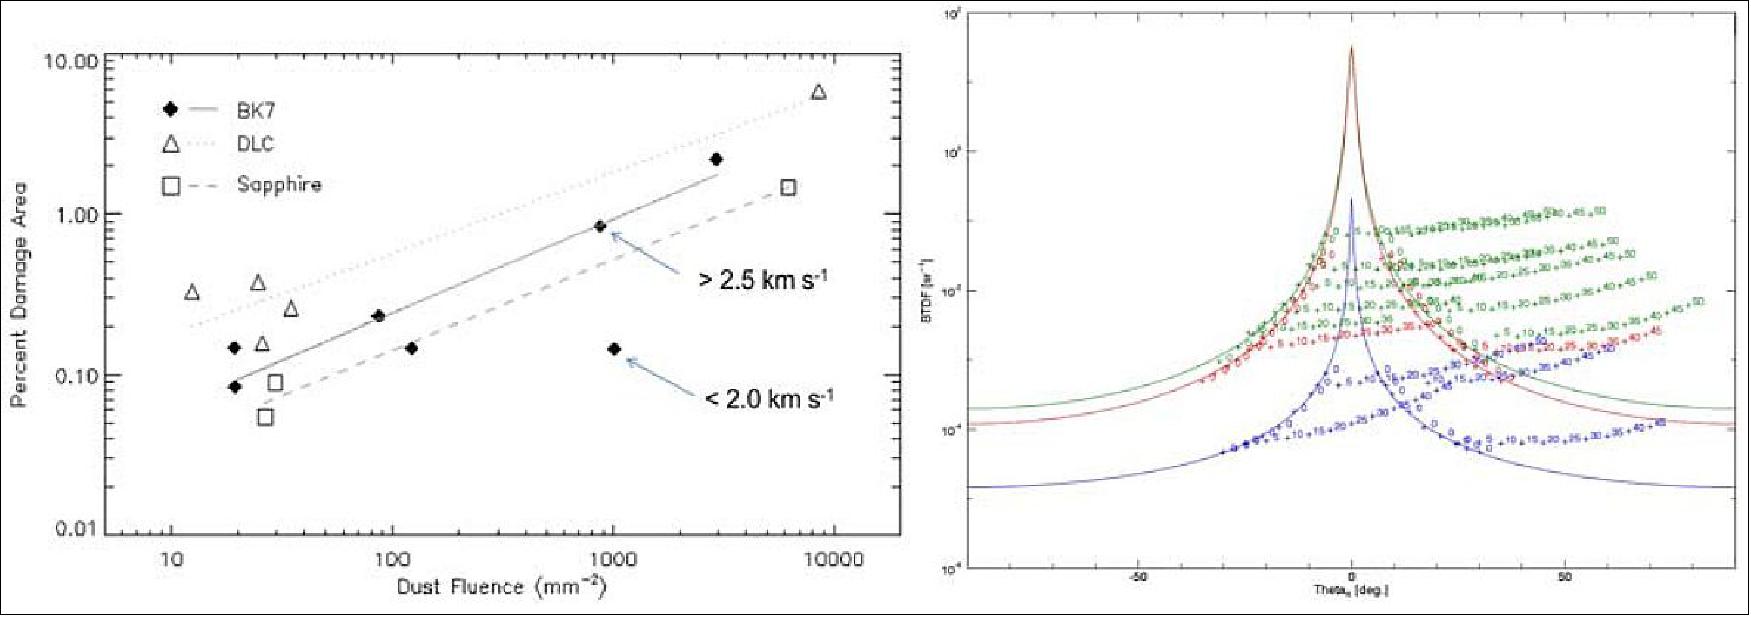 Figure 88: Left: The effect of dust fluence on percent damage area for the three glass types used in the WISPR Dust Impact experiment. The lines are simple linear fits to the data. Right: Fits to the BTDFs (Bidirectional Transmittance Distribution Functions) of pristine (blue curve) and damaged BK7 (red/green curves correspond to different samples). The data points are marked by crosses (image credit: WISPR collaboration)